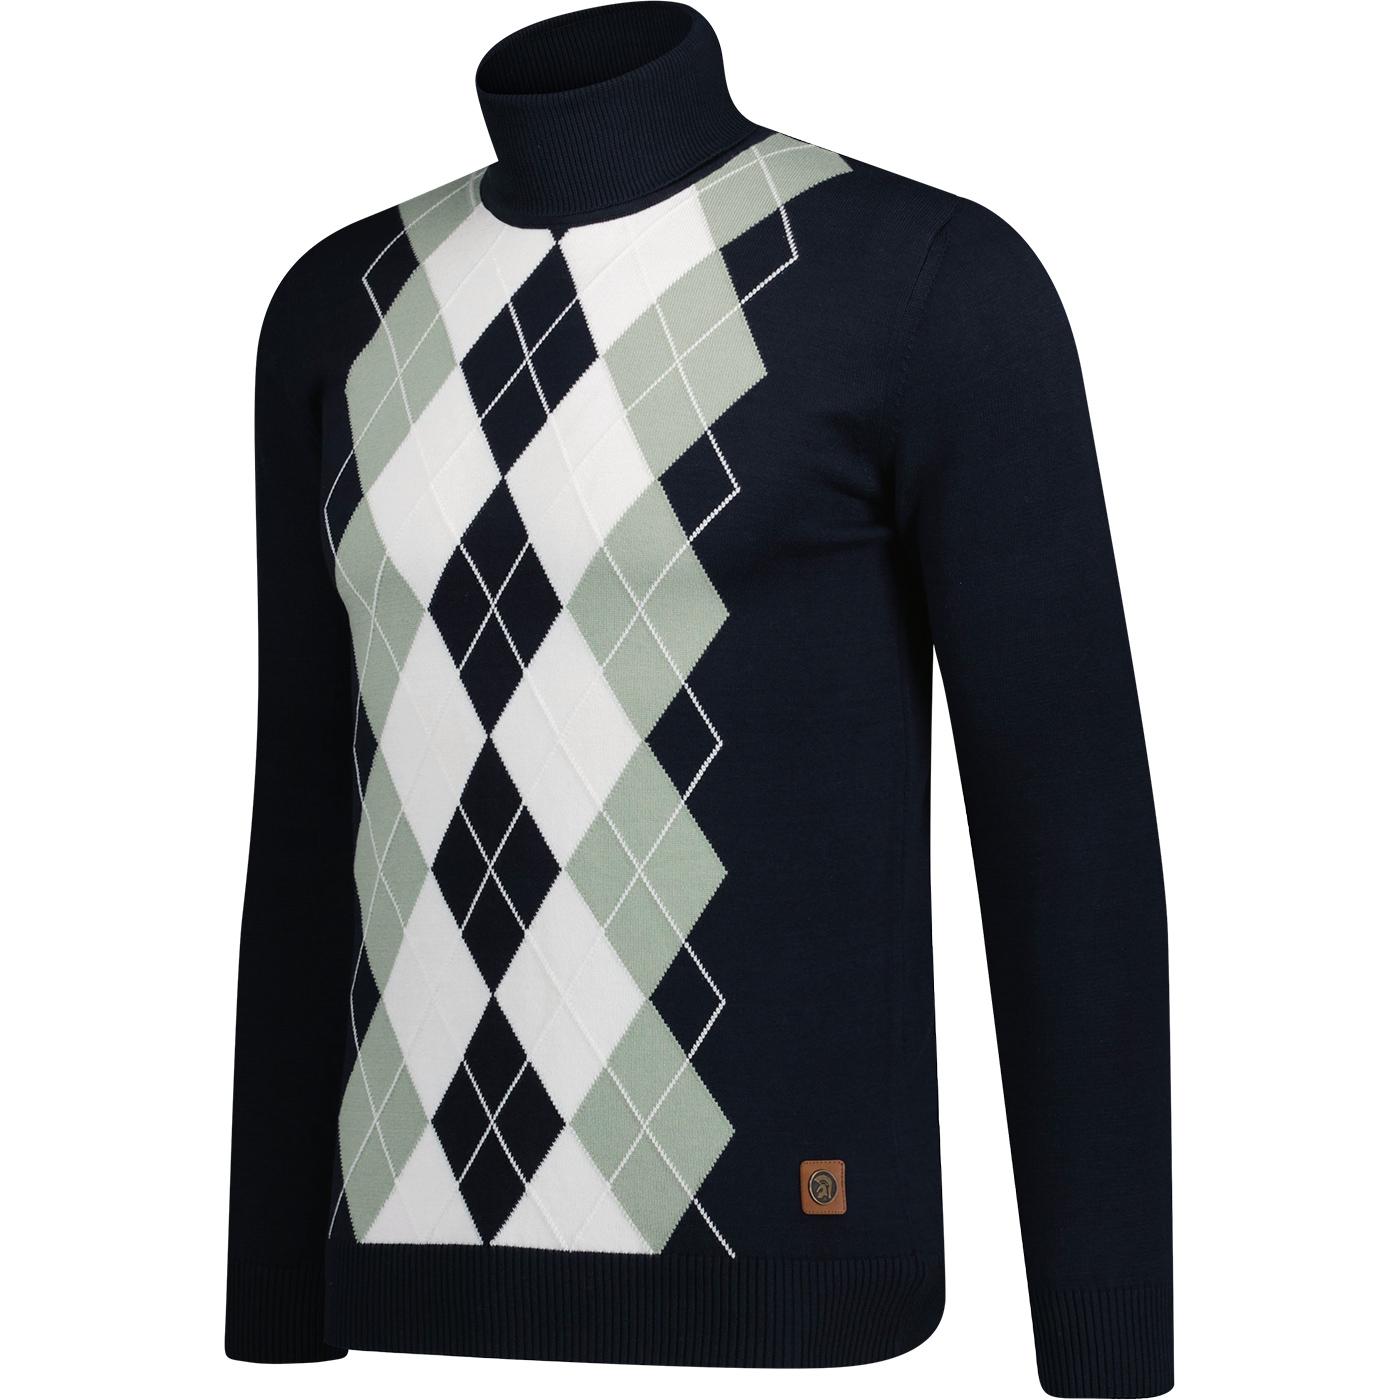 TROJAN RECORDS Mod Argyle Knitted Roll Neck in Navy